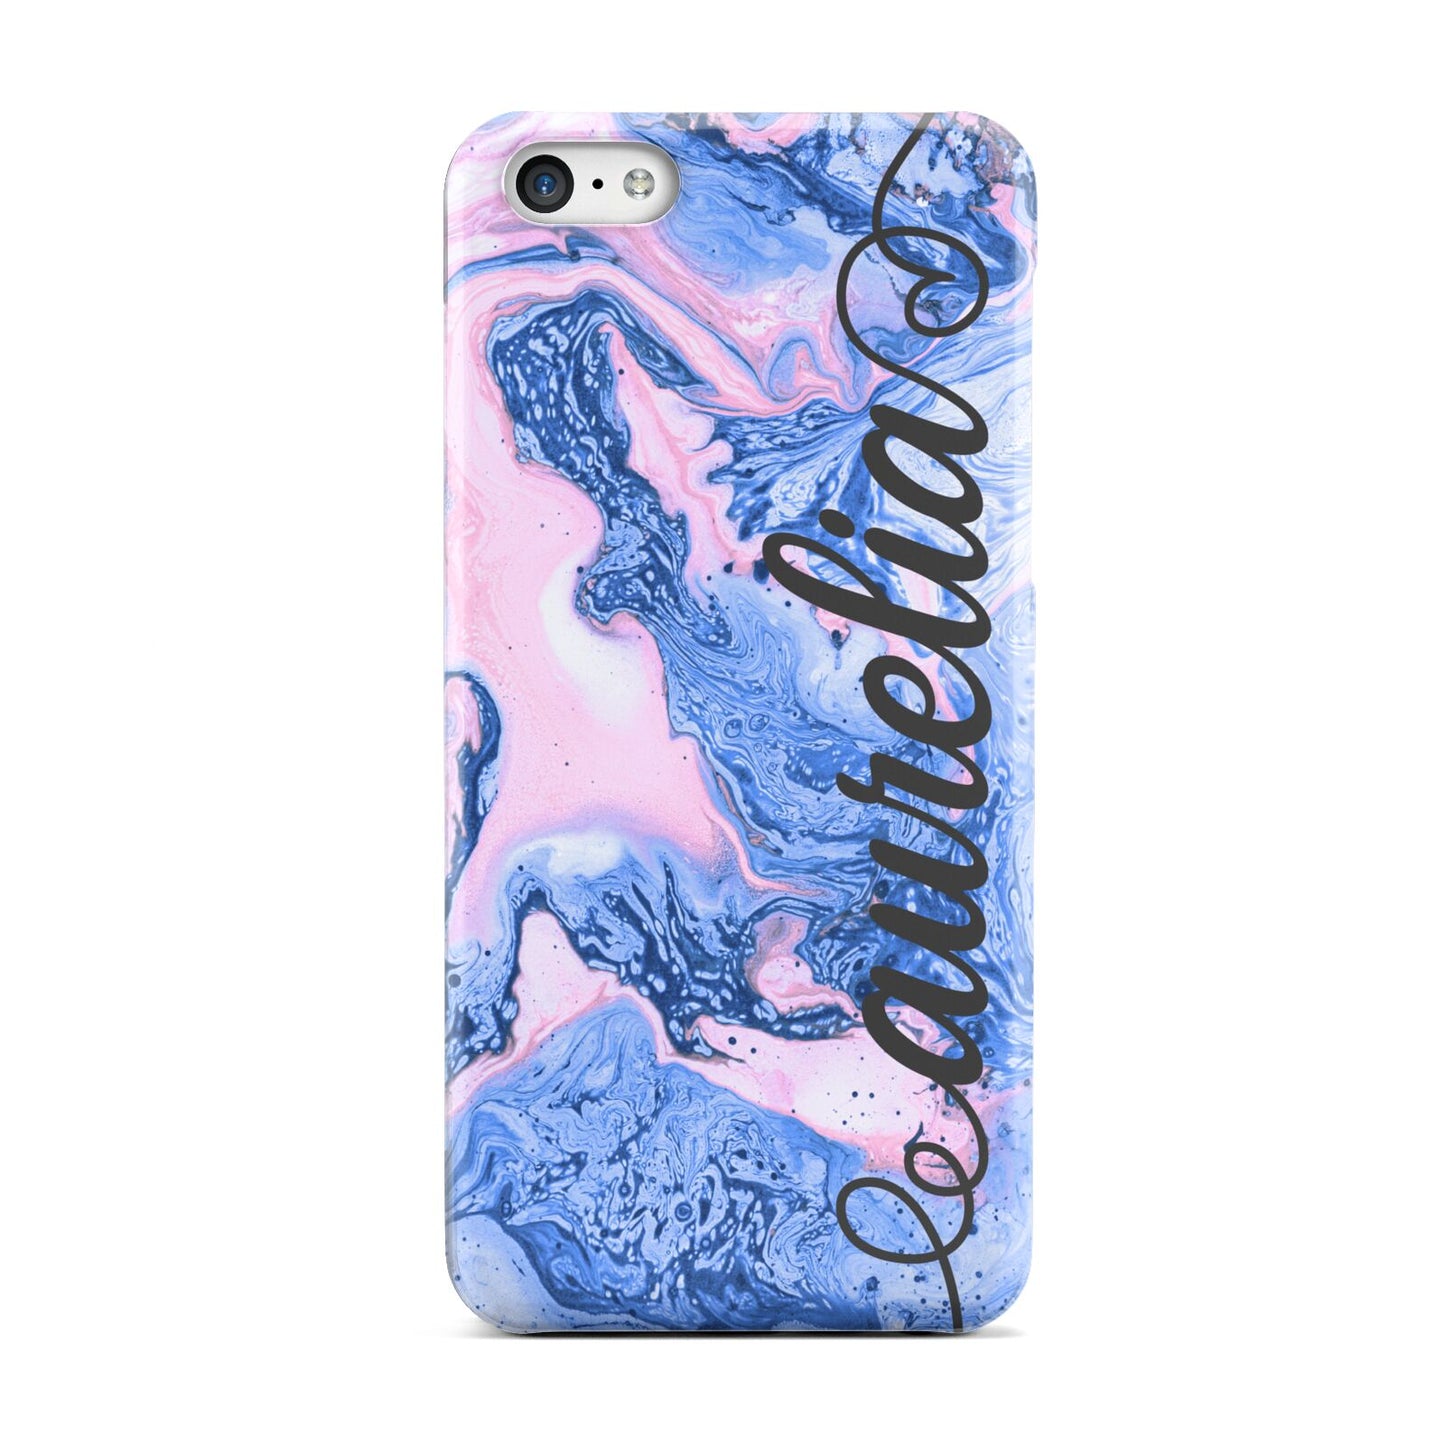 Ocean Blue and Pink Marble Apple iPhone 5c Case